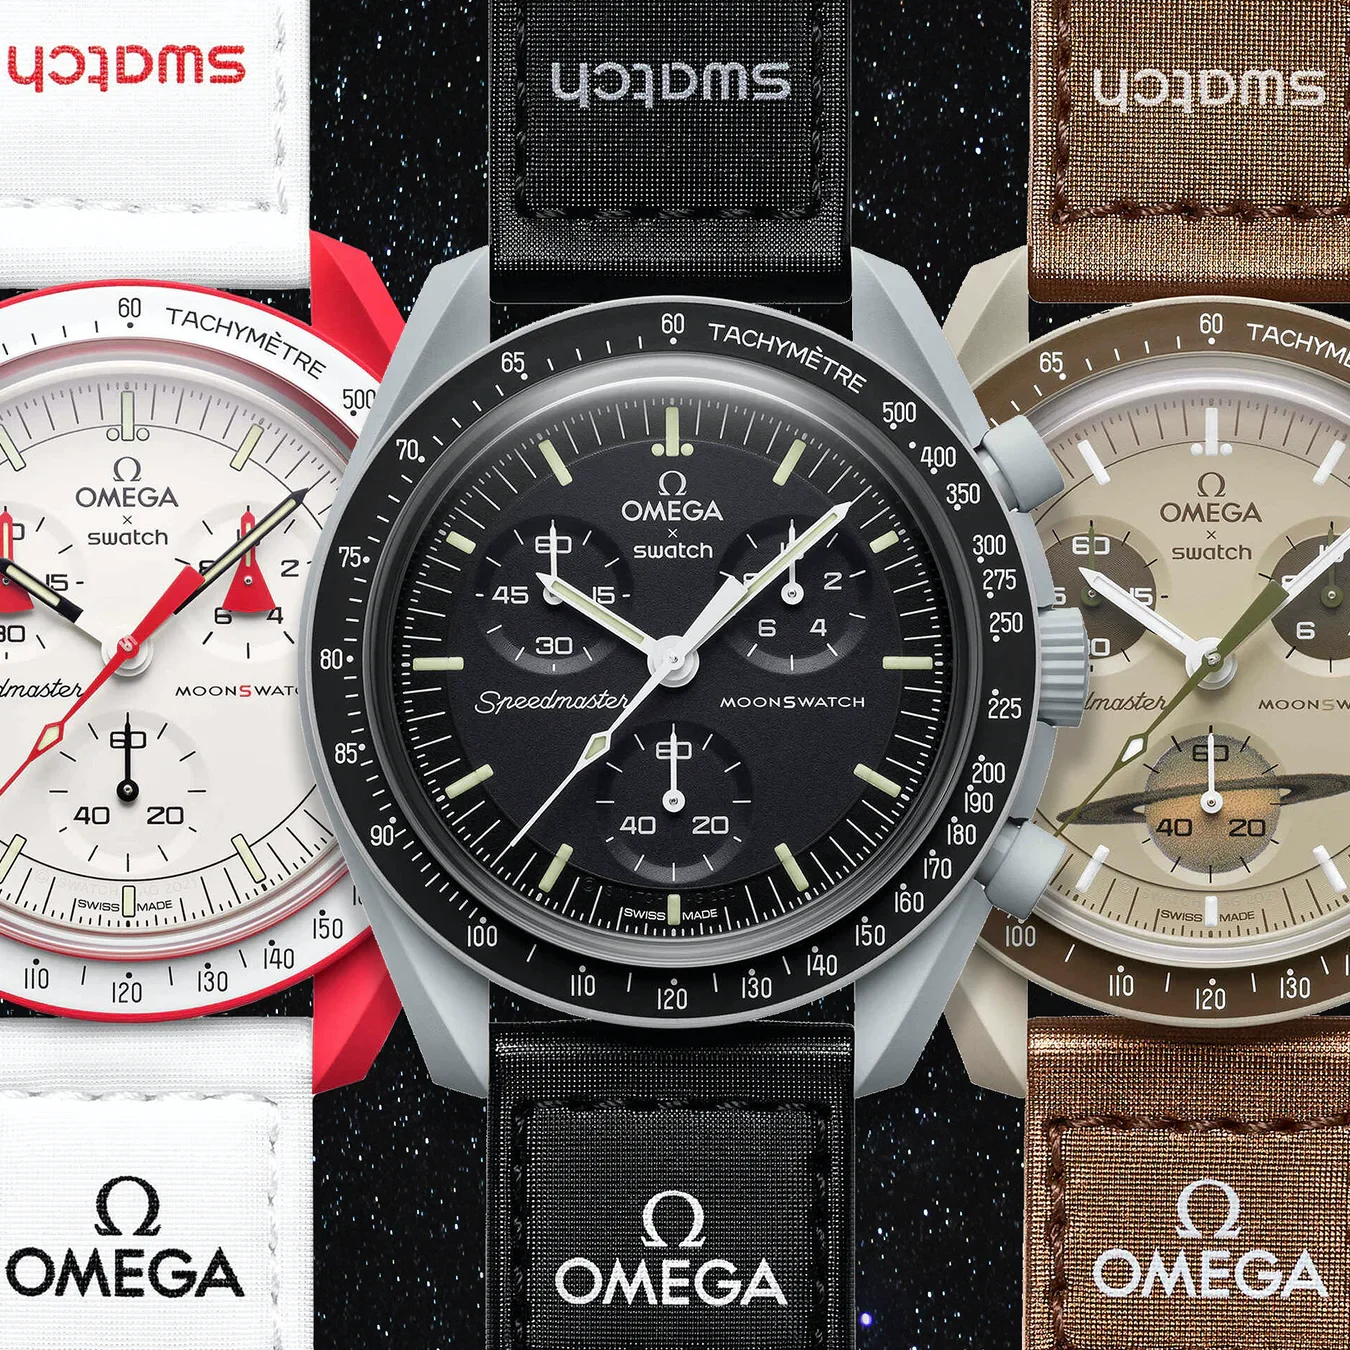 OMEGA SWATCH MOONWATCH